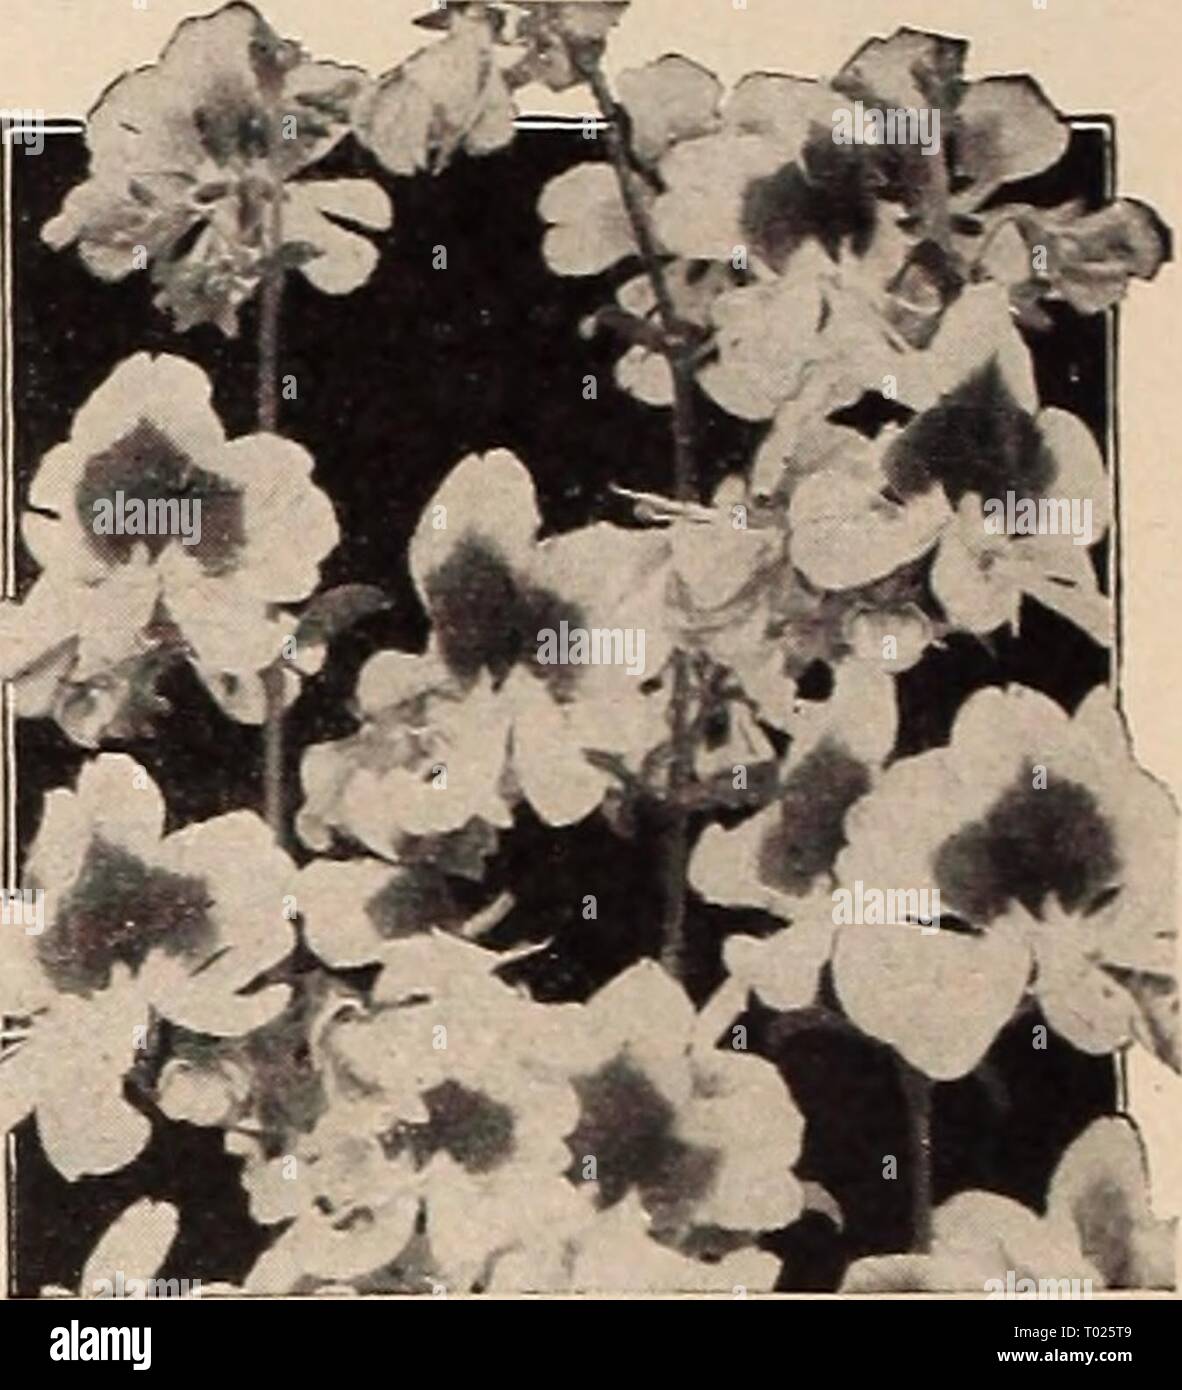 Dreer's garden book for 1941 . dreersgardenbook1941henr Year: 1941  Scabiosa caucasica, Giant Hybrids Saponaria ® &n Soapwort 3867 Ocymoides, Brilliant. |hp] A Covered all summer long with small bright rose blooms. 9 in. tall. Pkt. 10c; large pkt. 25c; J oz. 40c. 3869 Vaccaria, Rose. ® A very pretty annual 2 feet tall bearing great masses of showy satiny pink flowers not unlike a glorified Gypsophila. Blooms all sum- mer long. Pkt. 10c; oz. 30c. Sanvitalia ® a Creeping Zinnia 3863 Procumbens fl. pi. Fine for dwarf beds, edges, or borders. Graceful double bright yellow blooms measuring about an Stock Photo